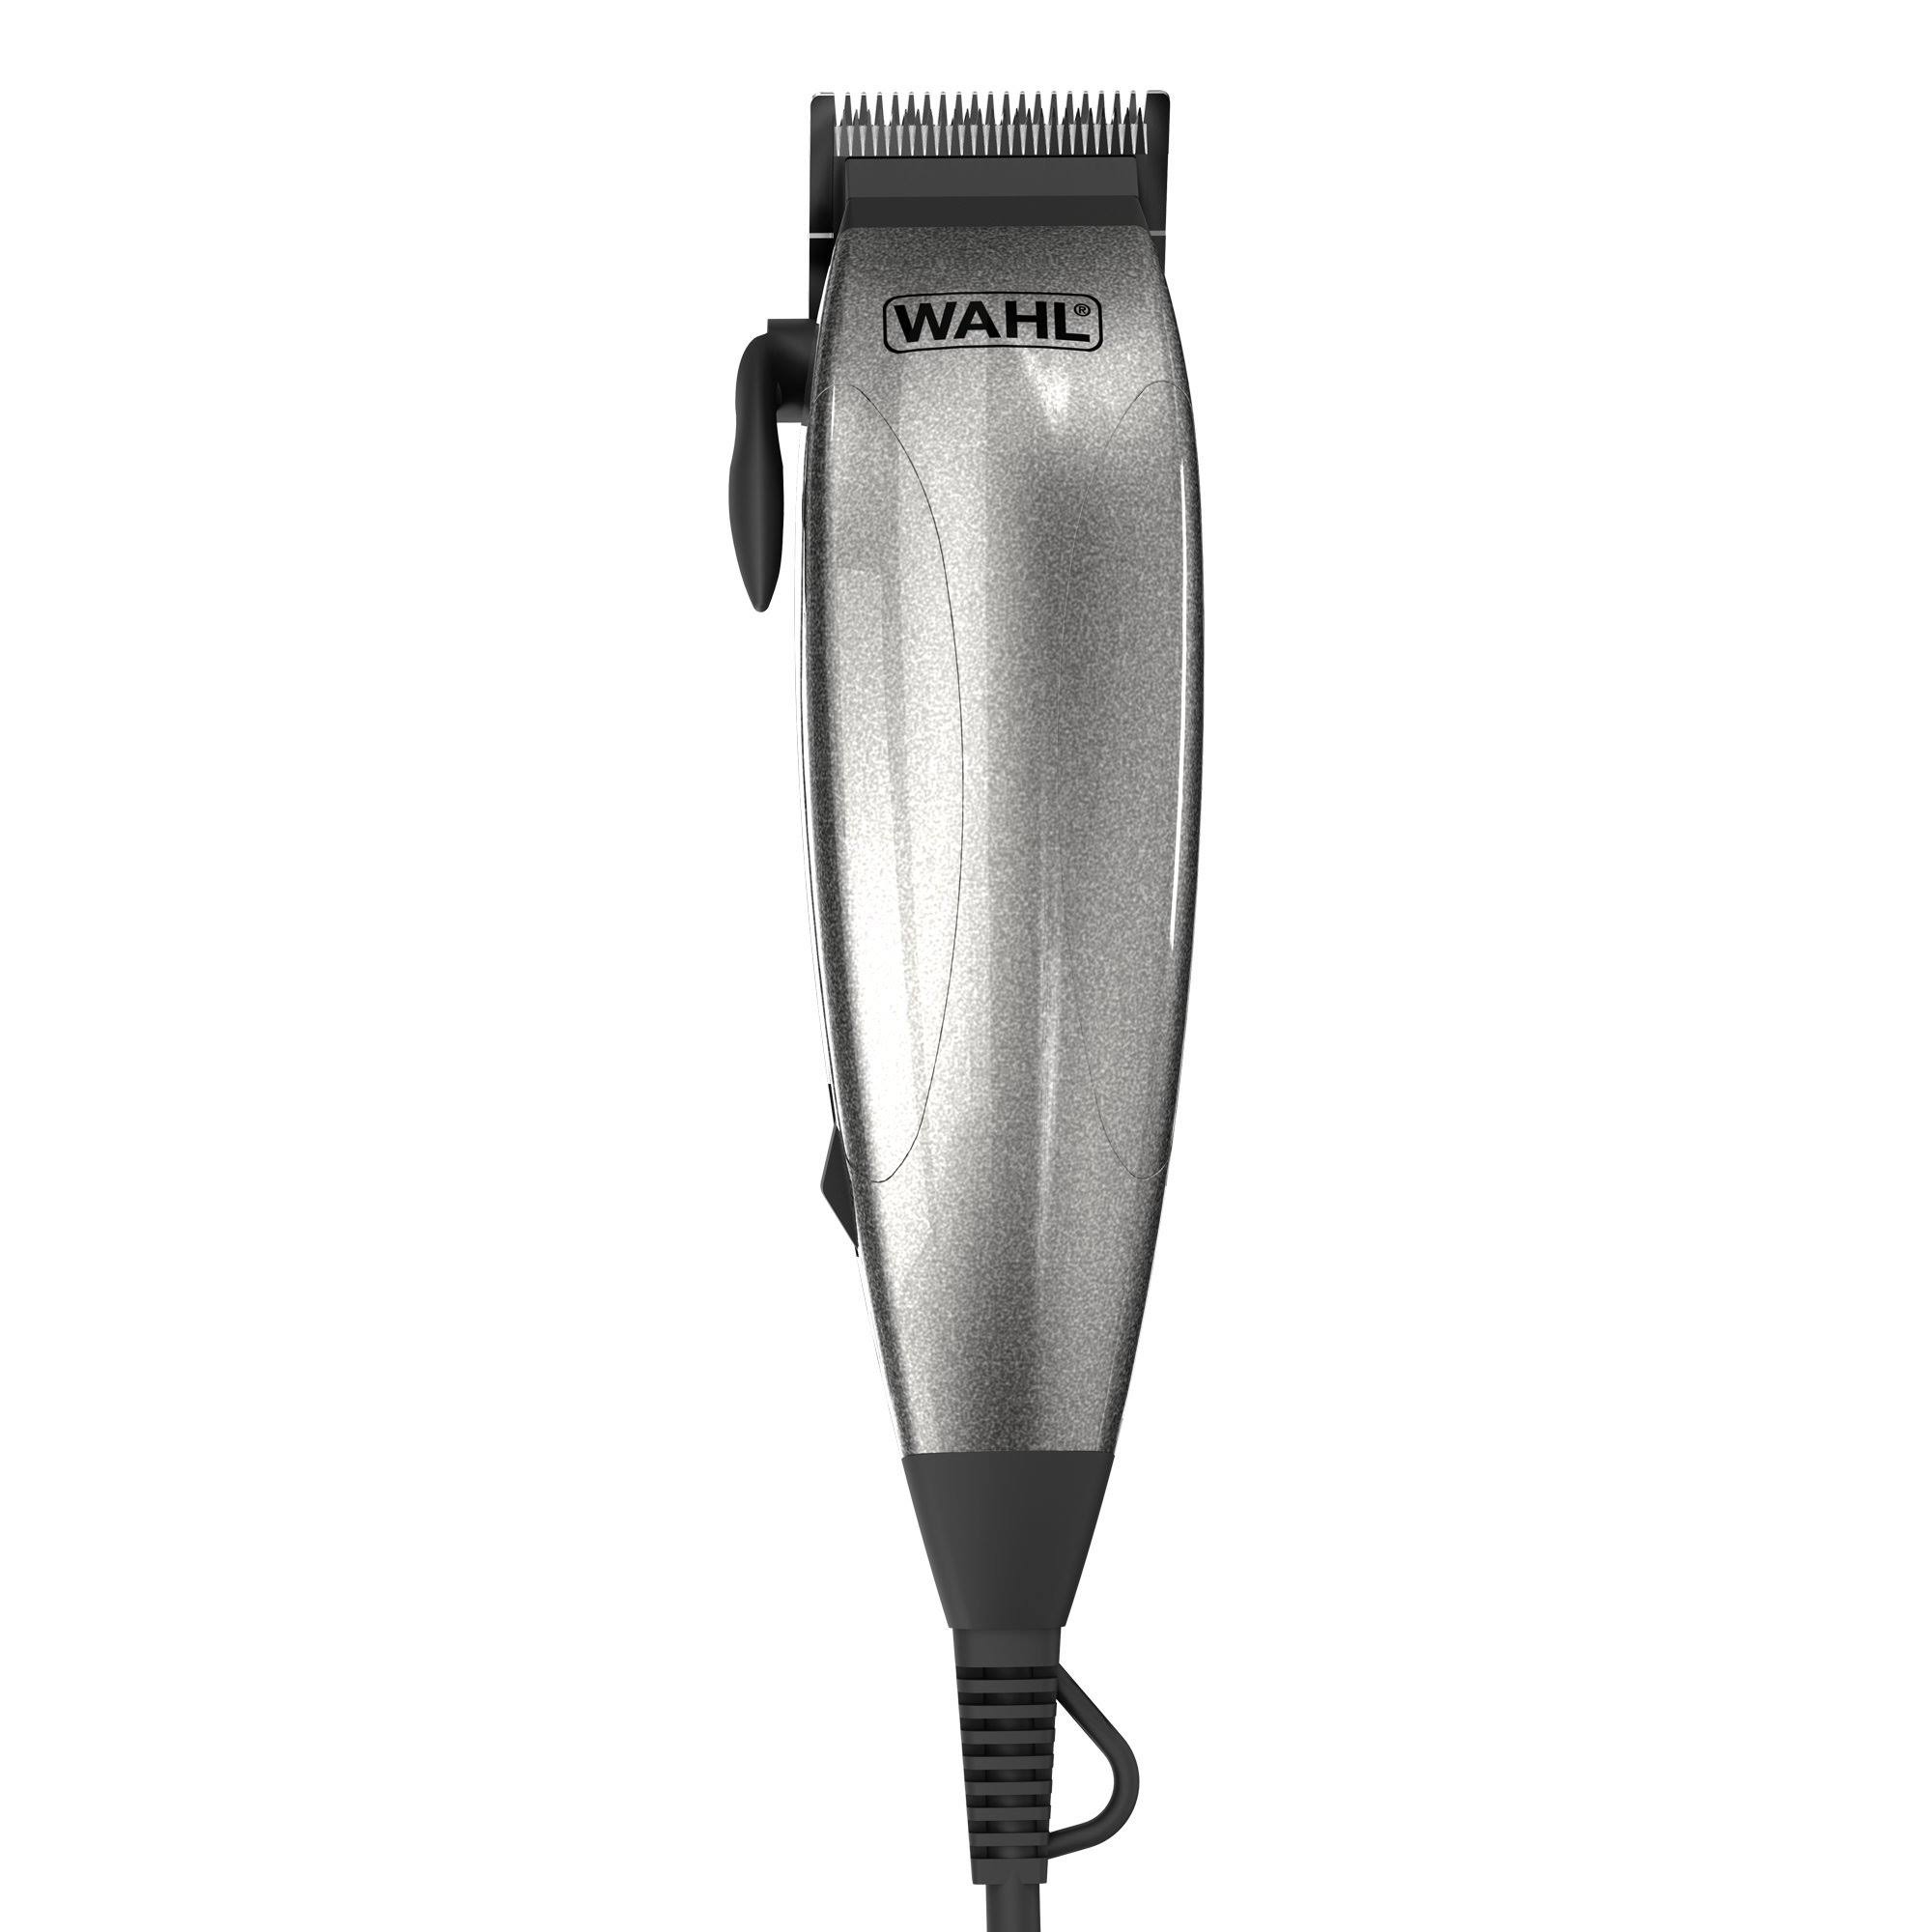 WAHL Clippers Vari Clip Corded Hair Clipper